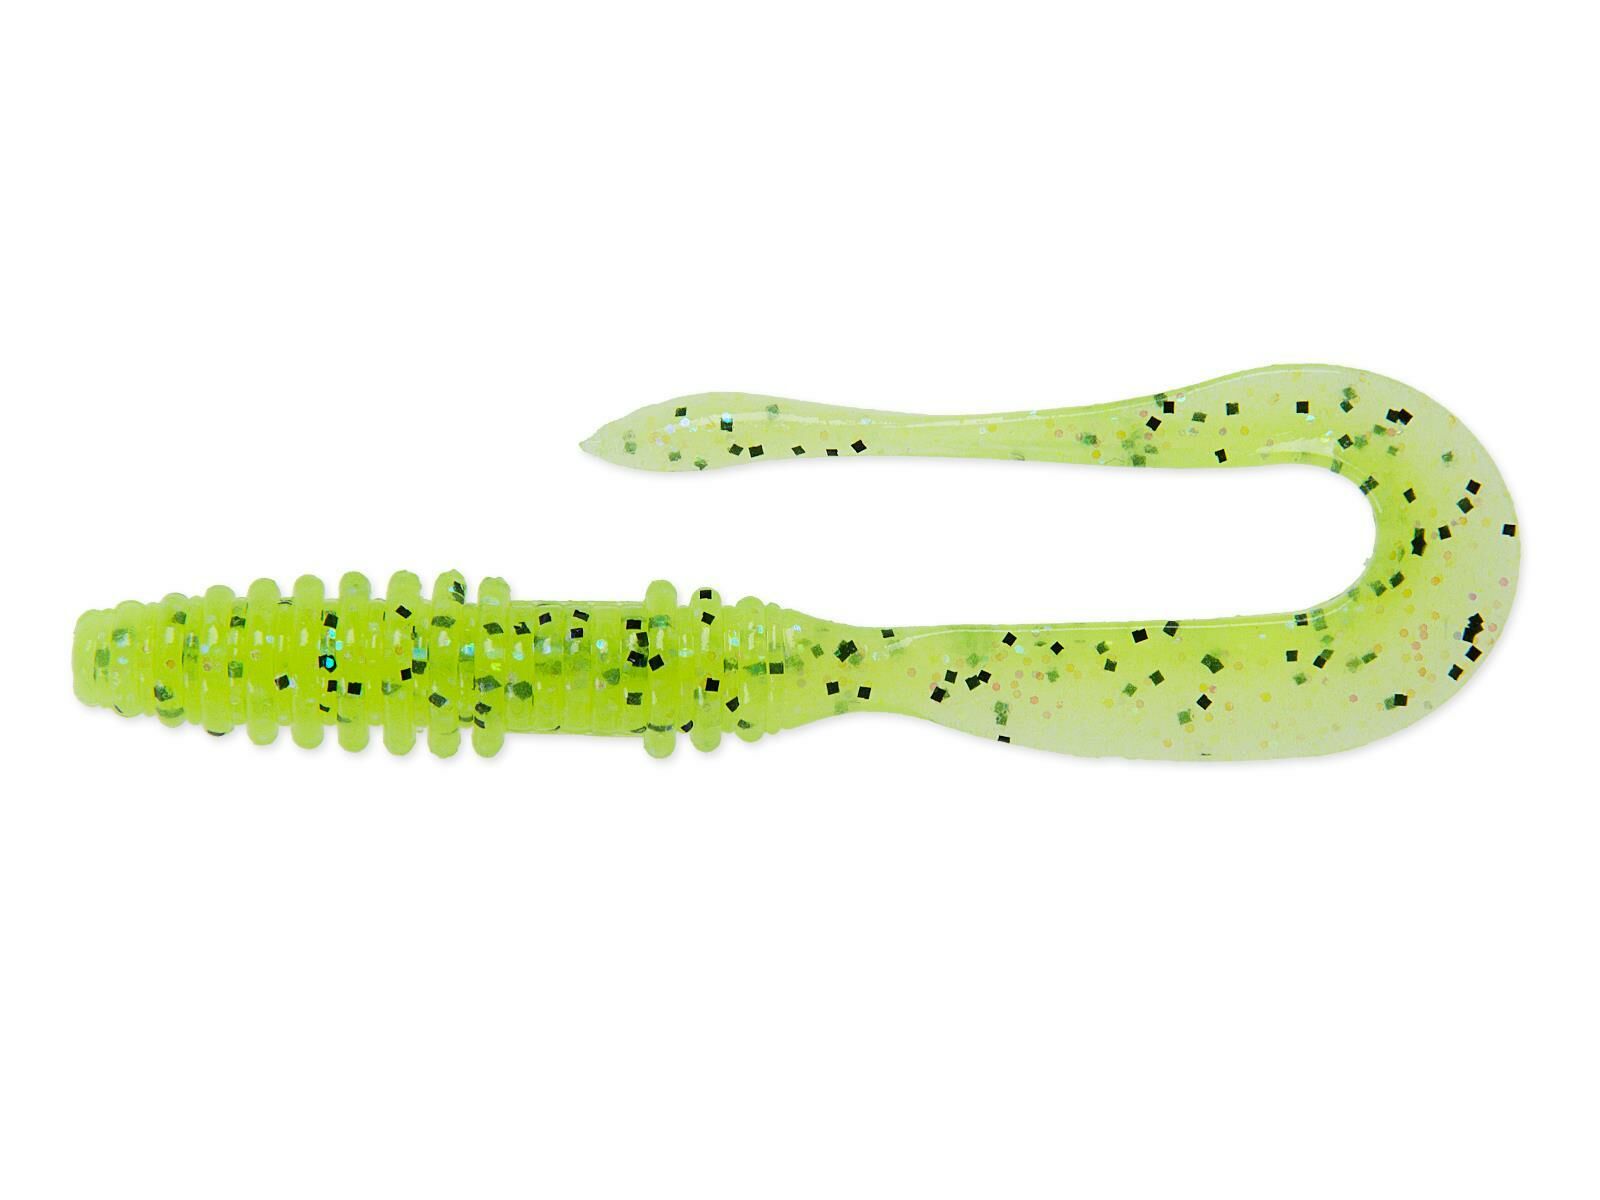 2.5" Mad Wag Mini - Electric Chartreuse